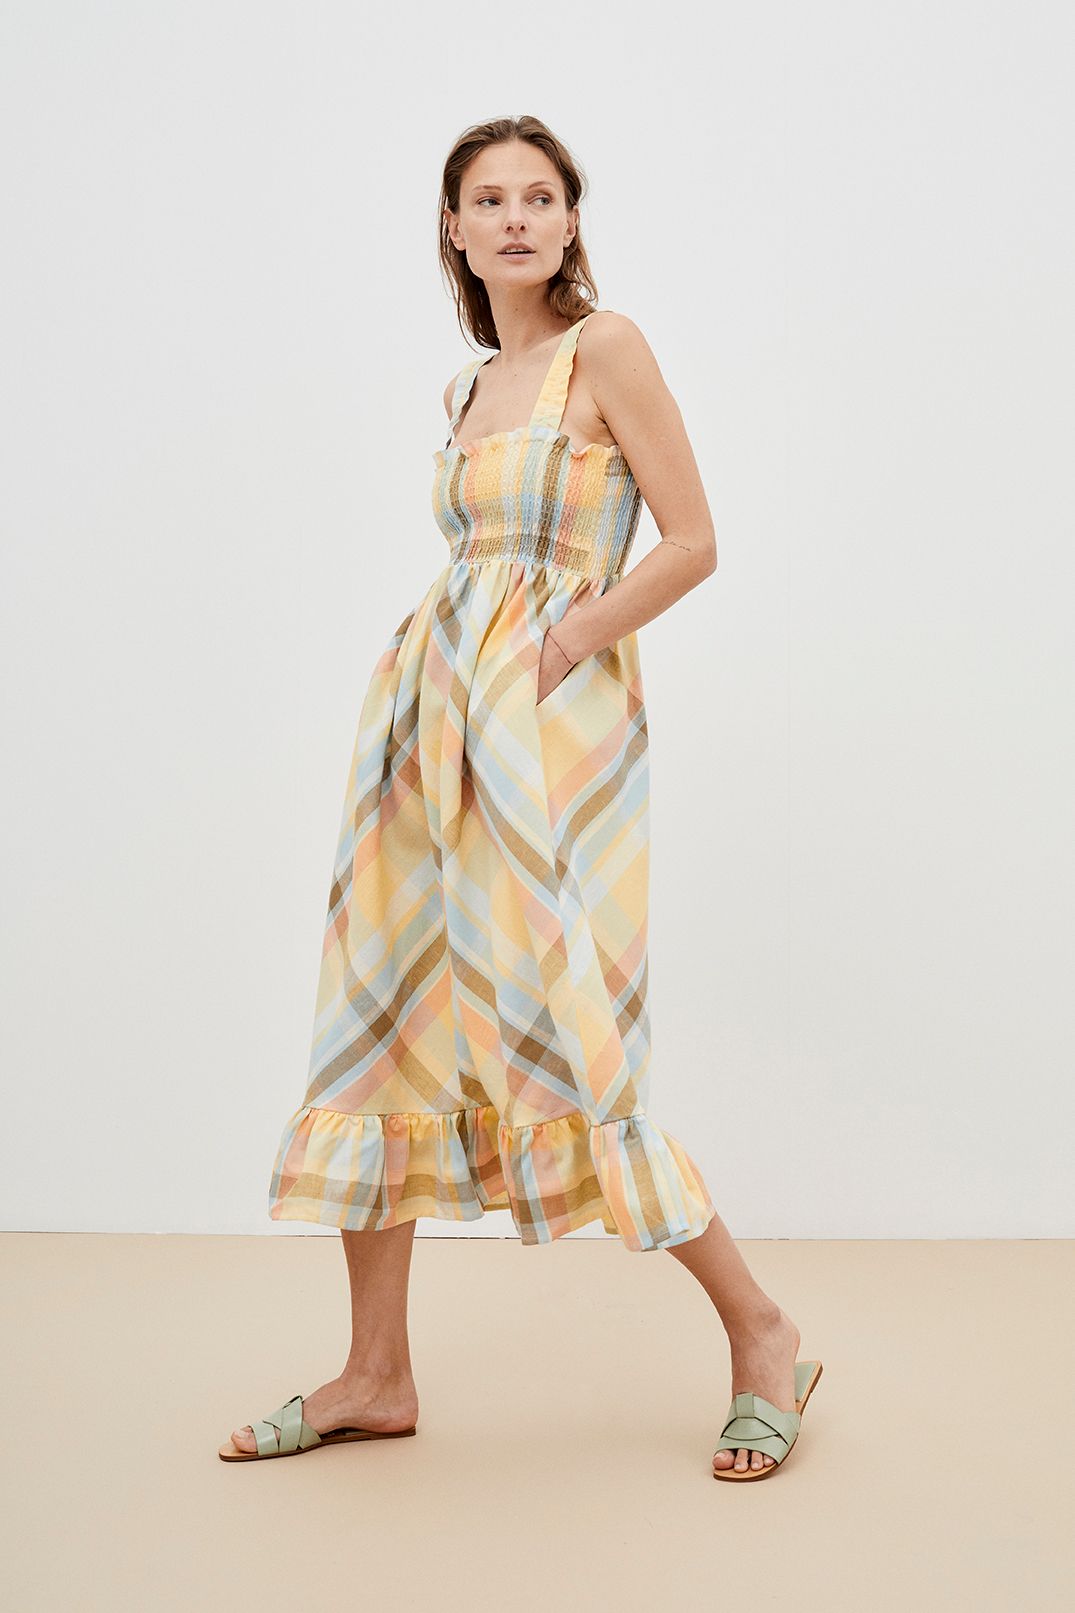 The breathable and lightweight Roberta women's summer dress is a flowy and feminine midi dress in checks. Made in Portugal by The New Society. Roberta's dress is made from lightweight and breathable fabrics for hot and humid weather. Milimilu offers women's dresses online in Hong Kong and Singapore.